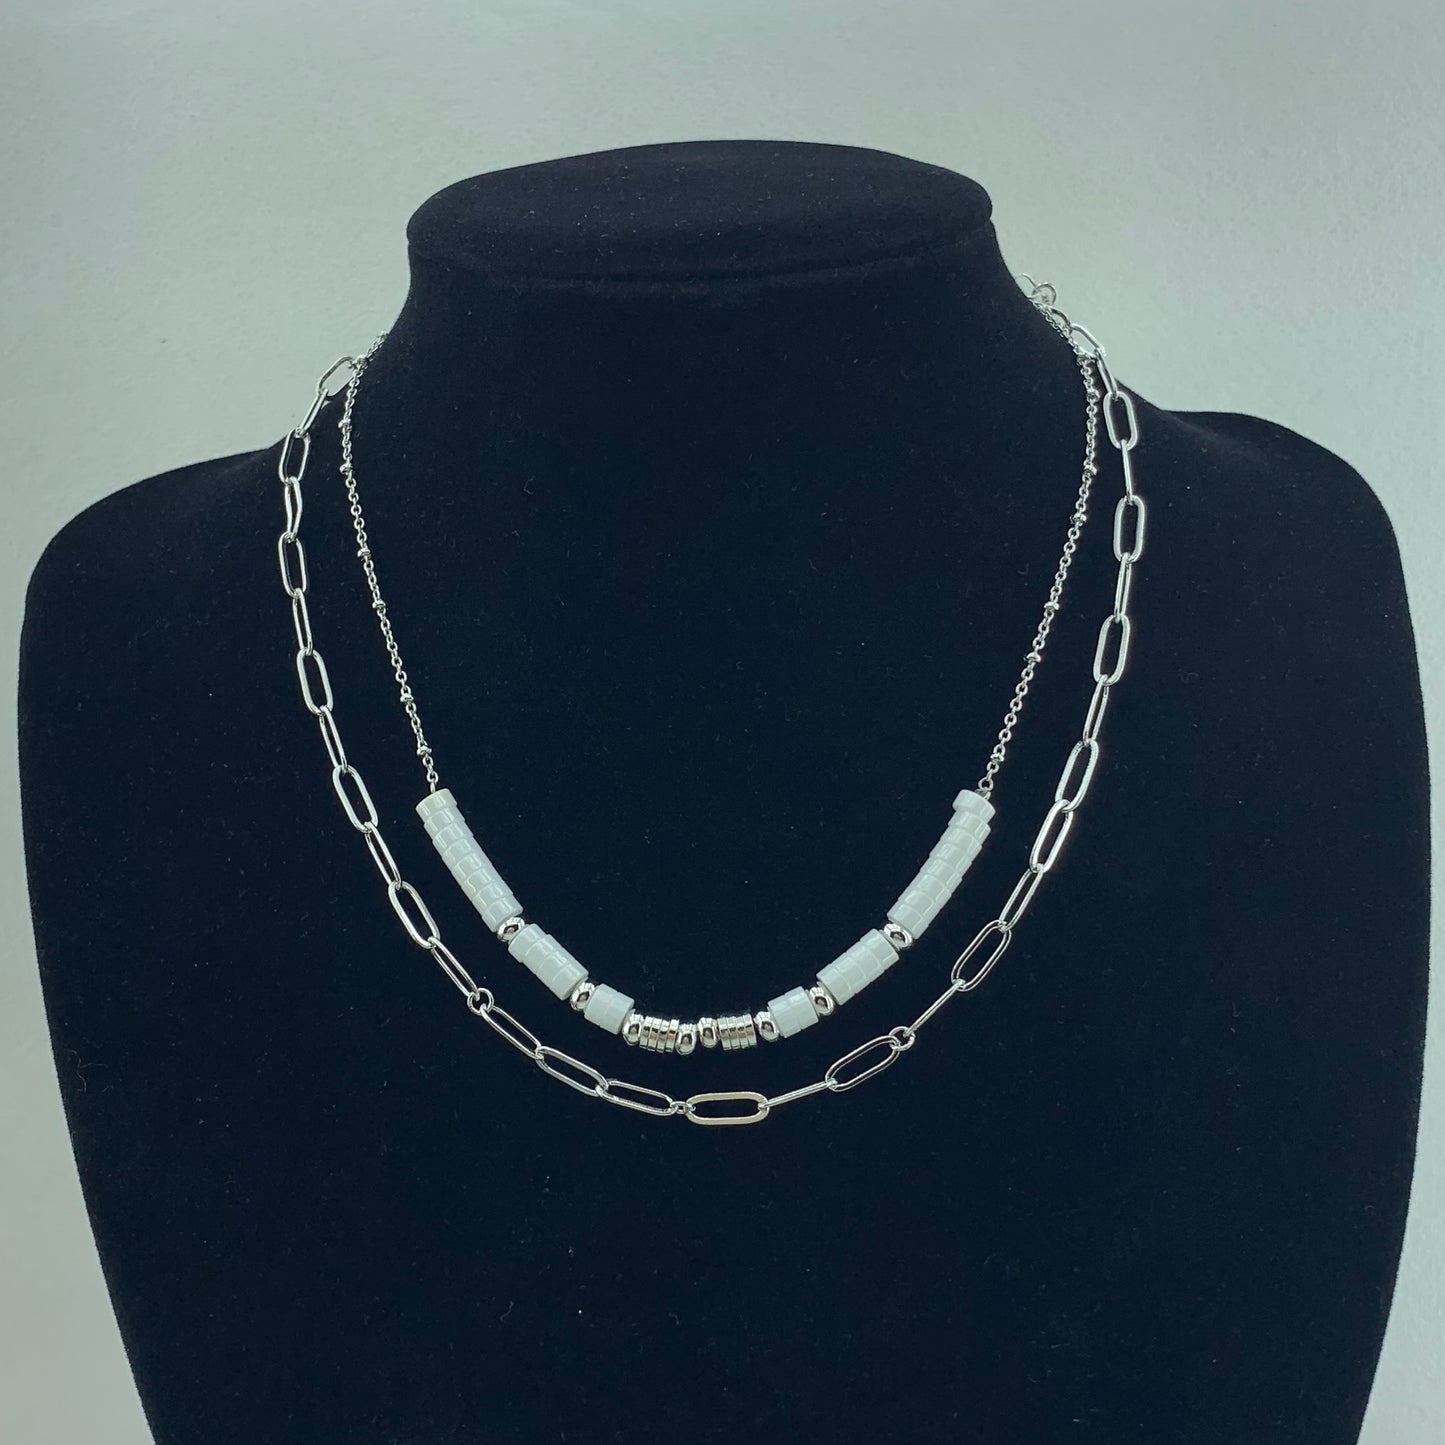 Women's Fashion Beads Chain Necklace